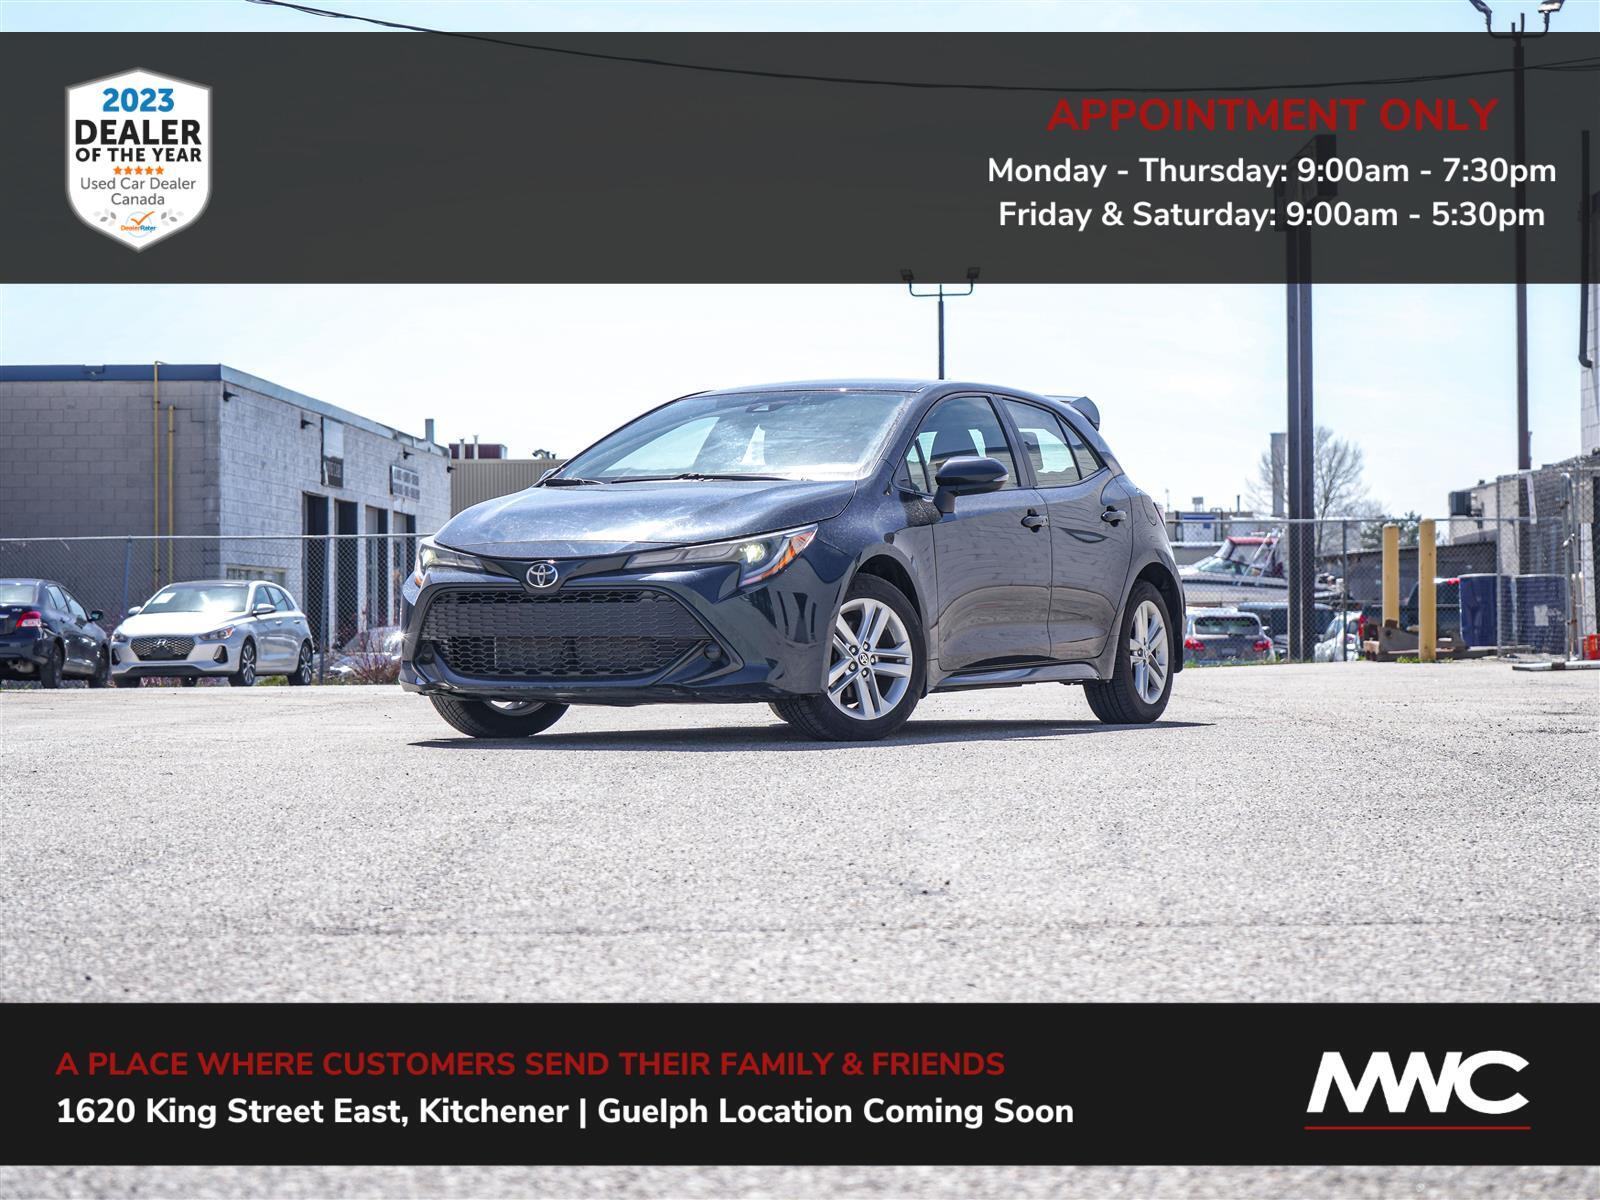 2019 Toyota Corolla SE | 2.0 | IN GUELPH, BY APPT ONLY